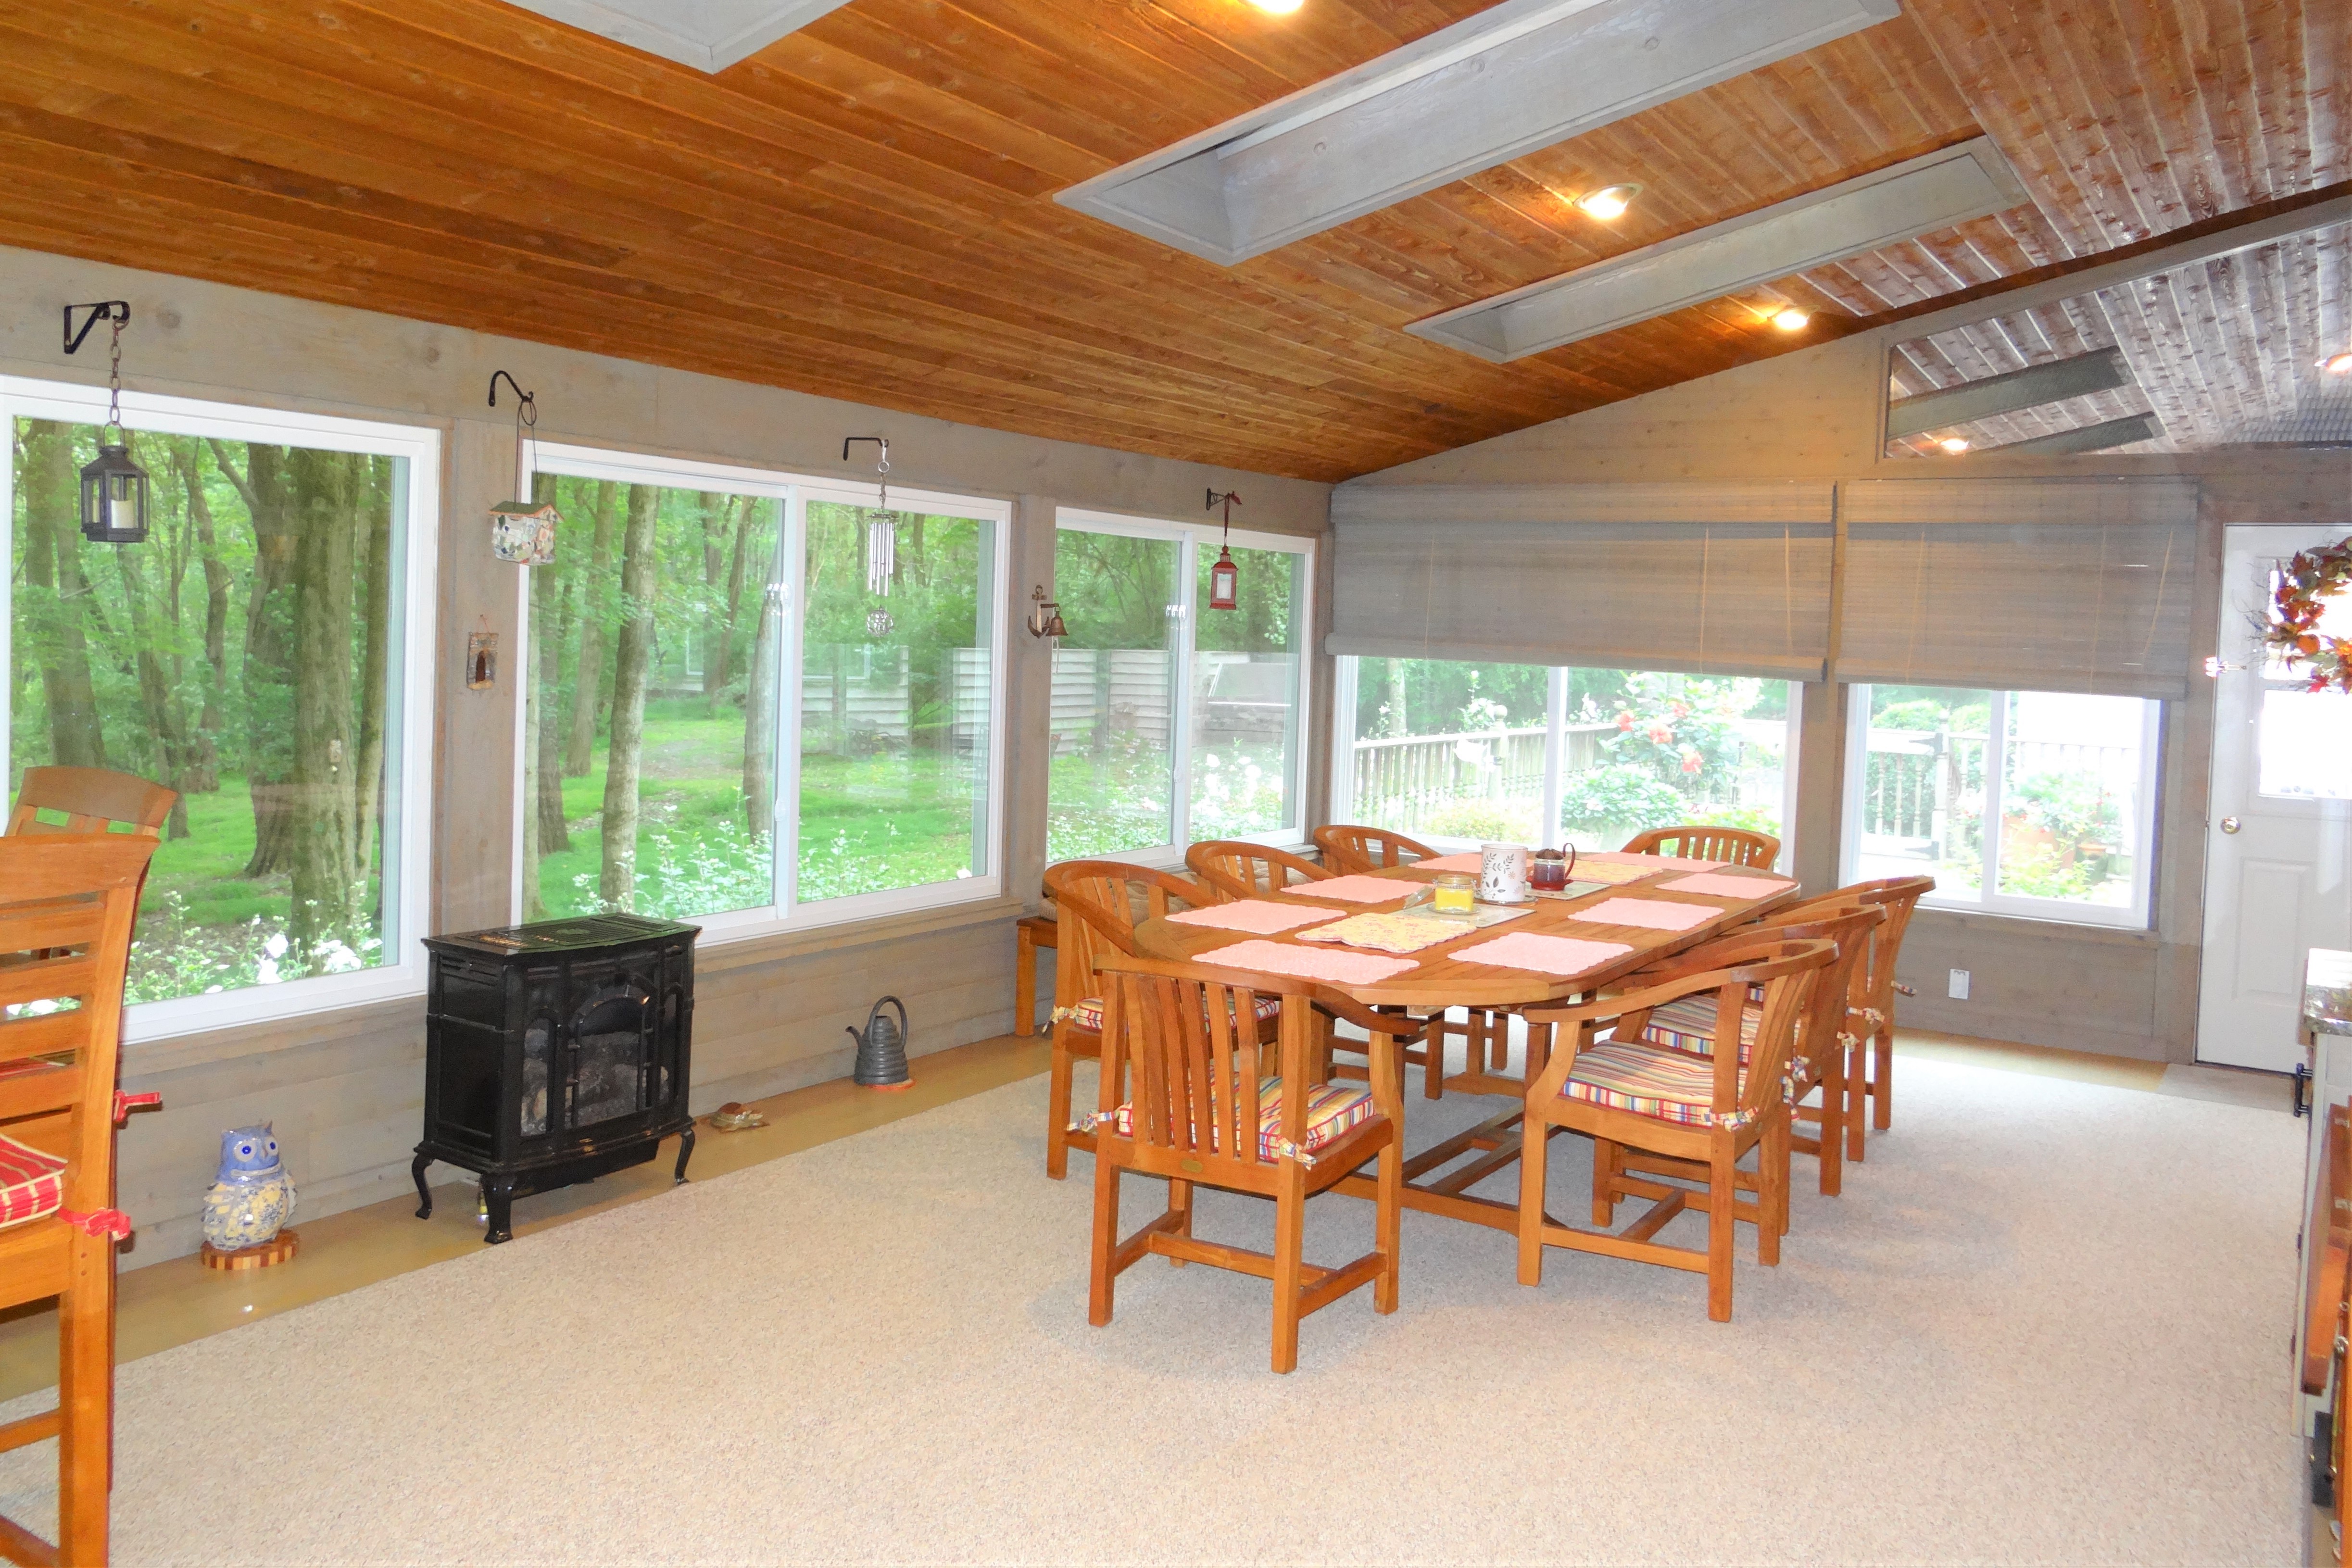 a sunroom with wood stove in pocopson township west chester, pa 19382 built by deluca construction